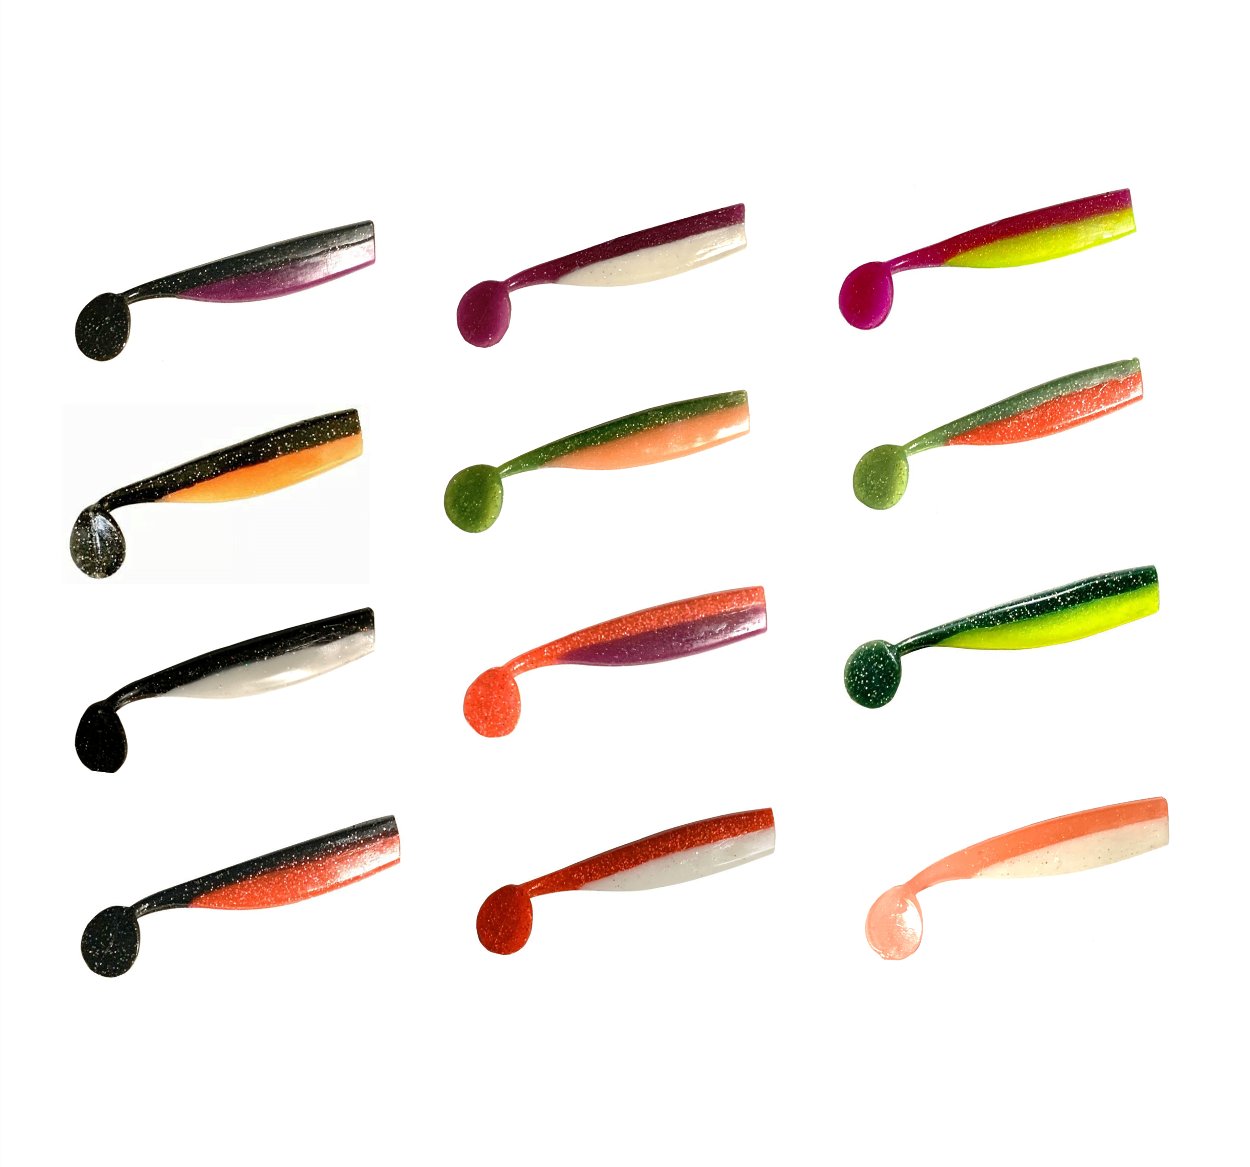 12pcs 3 3/4 in 4 color paddle tail swimbait two-tone colors